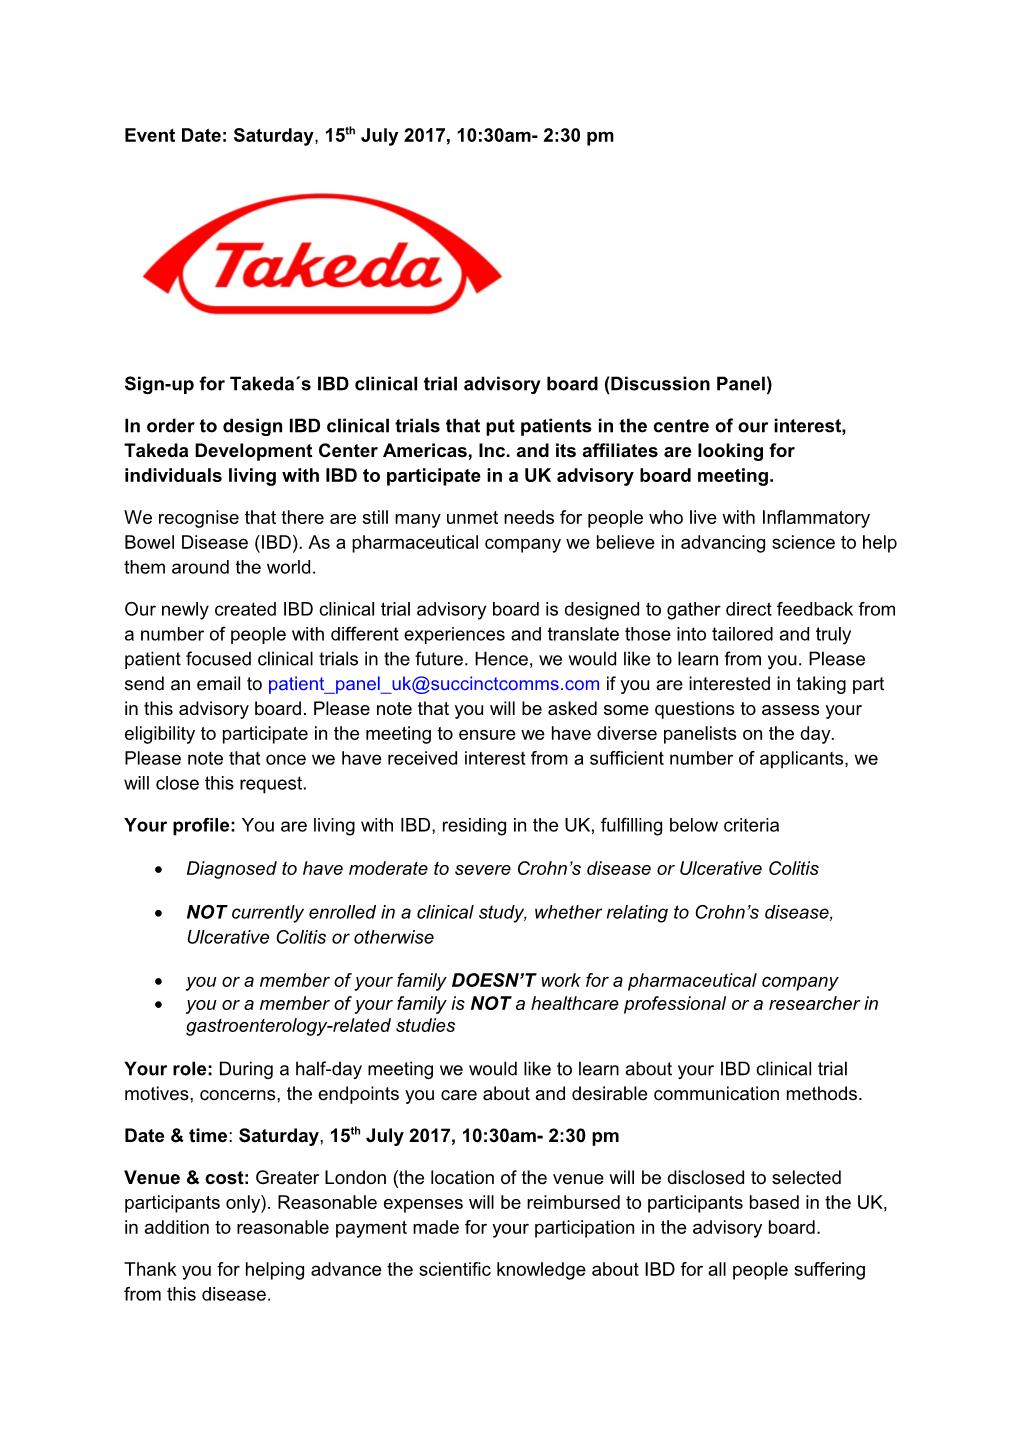 Sign-Up for Takeda S IBD Clinical Trial Advisory Board (Discussion Panel)